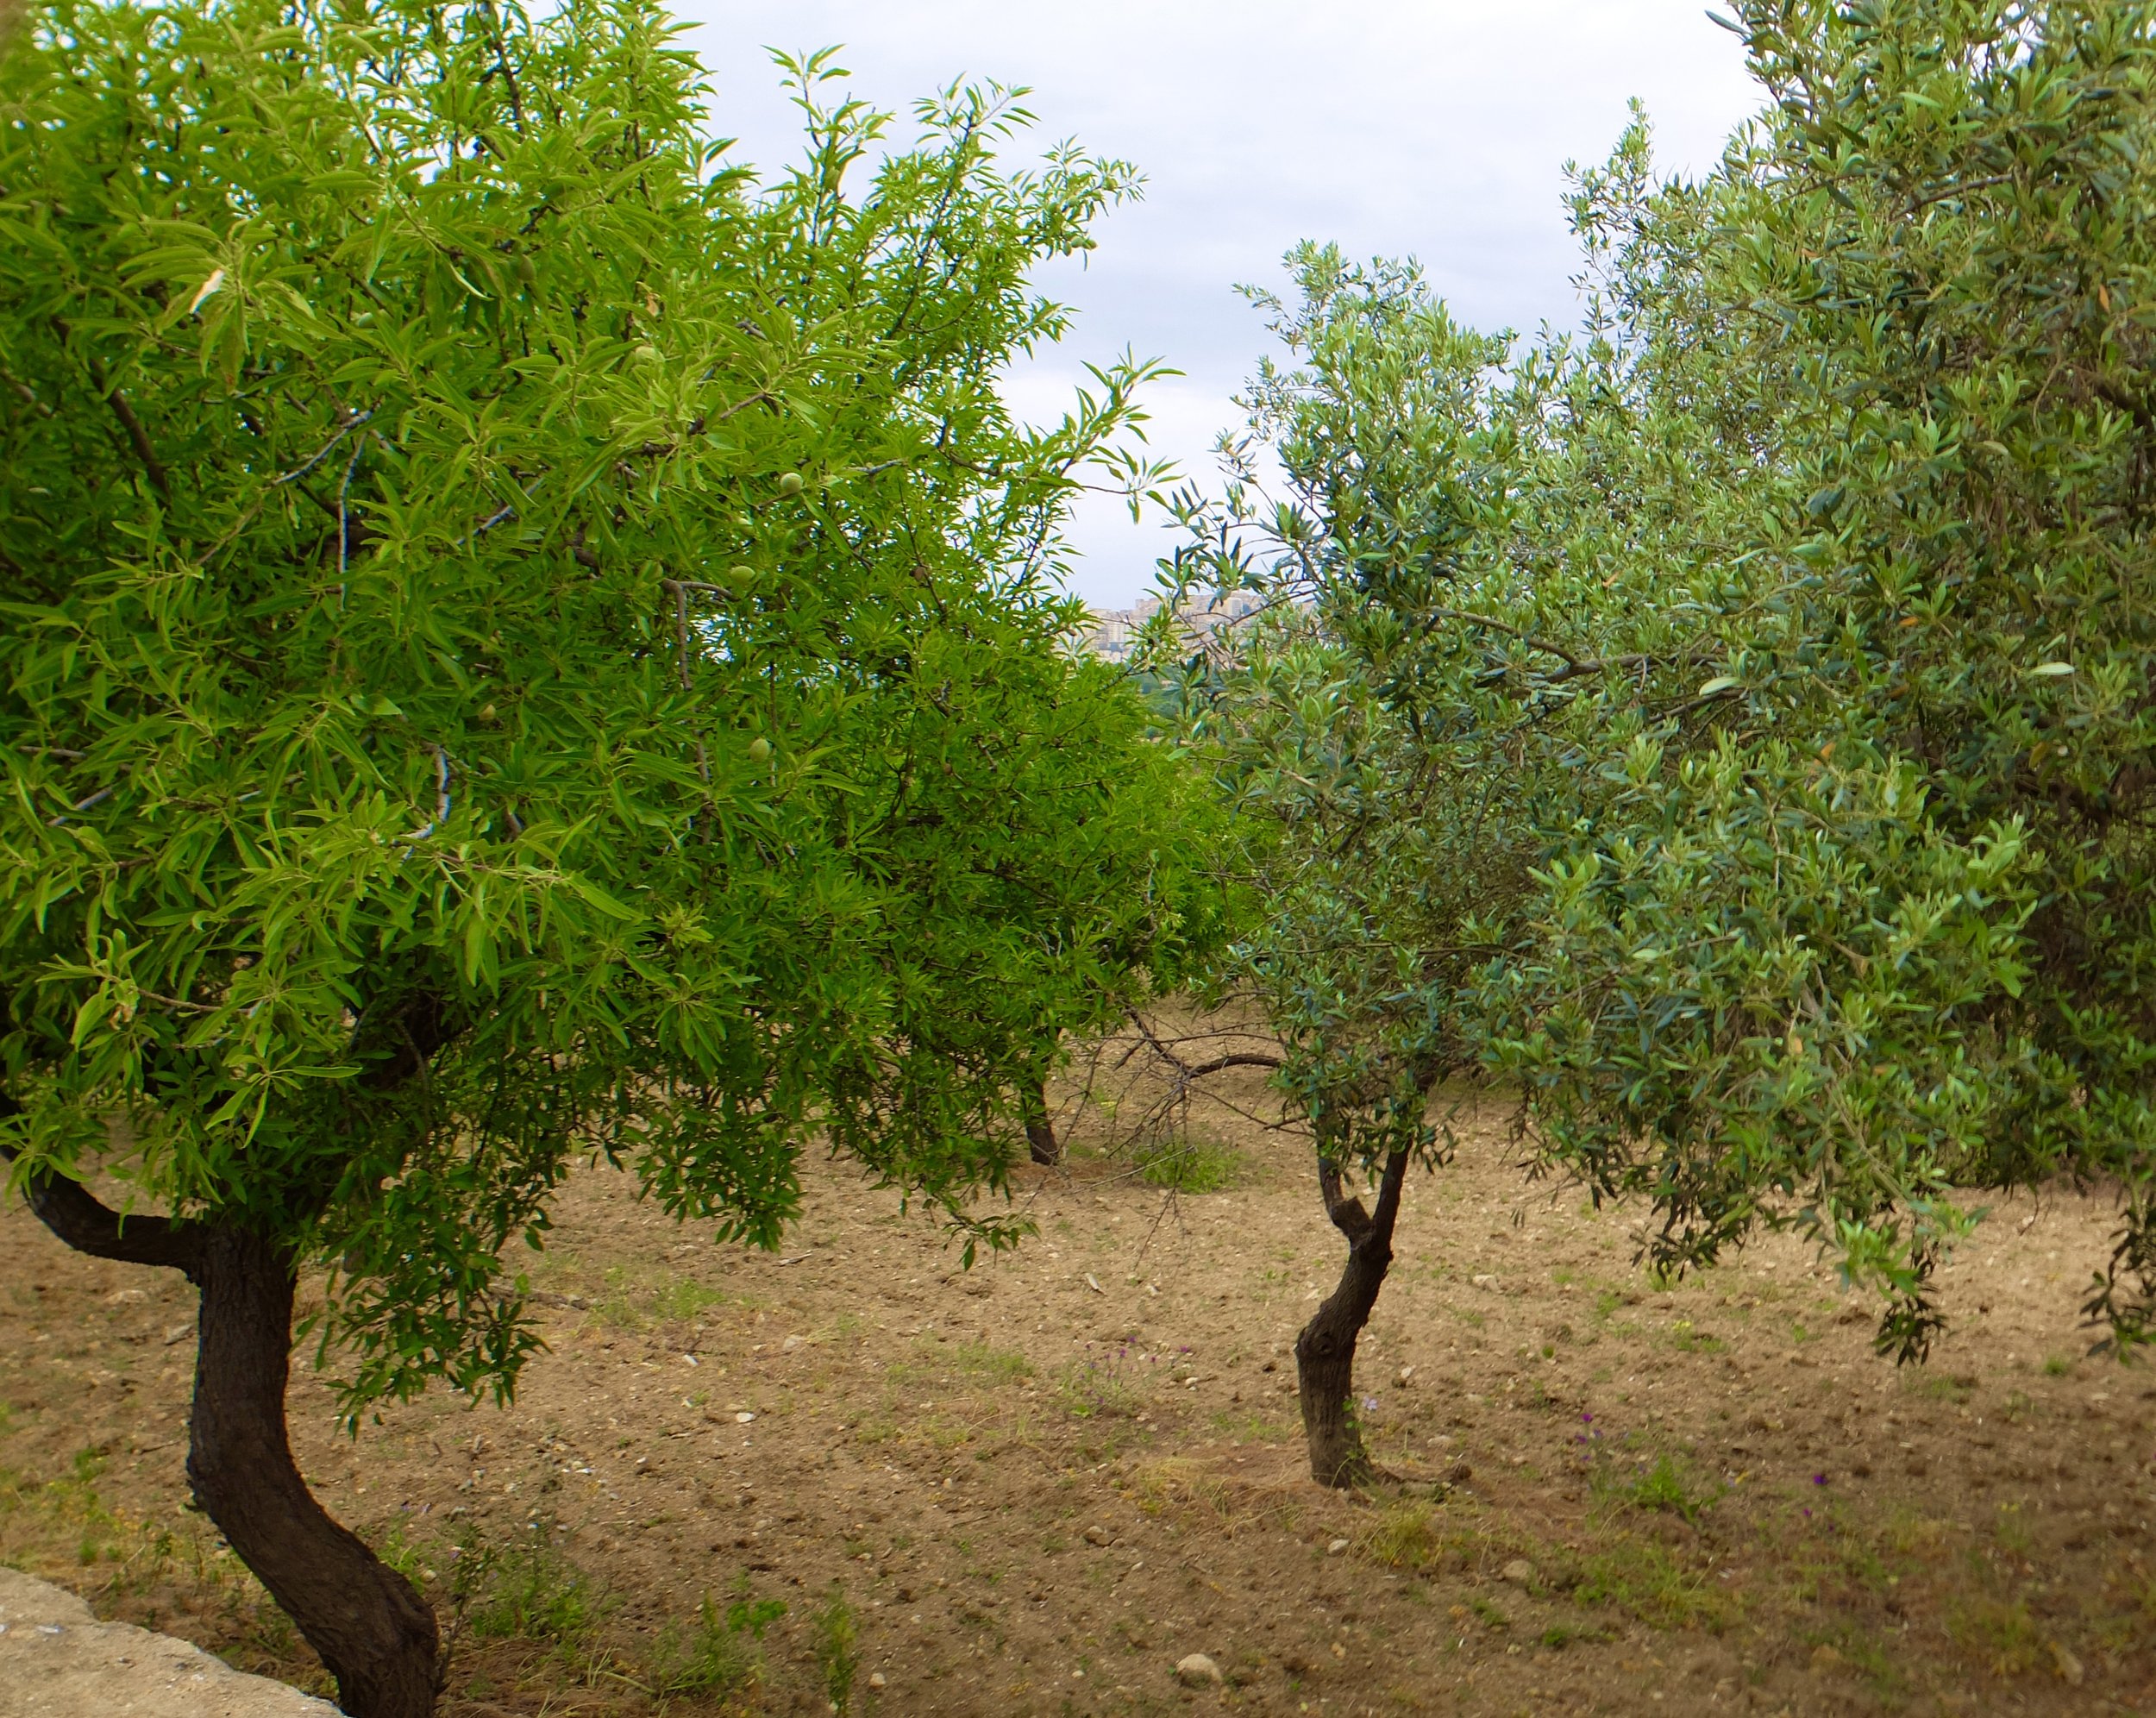  Olive tree next to almond tree.  Valley of the Temples.   